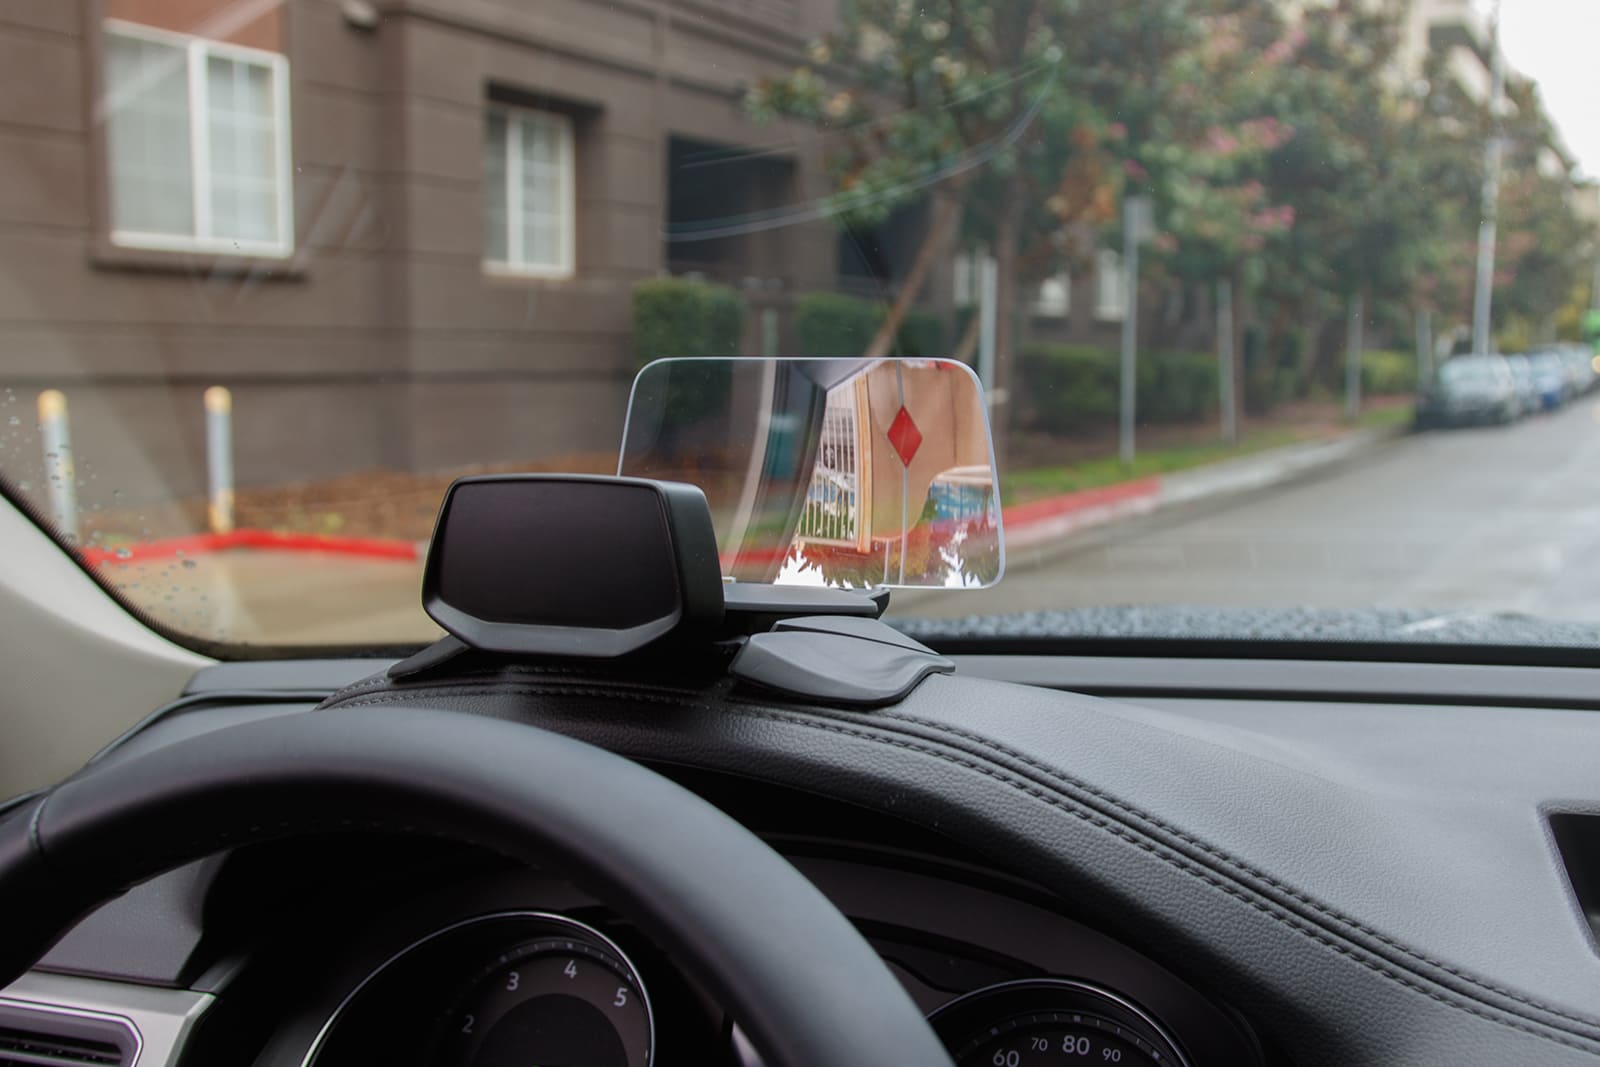 Heads-up display to stay focused on the road | HUDWAY Drive